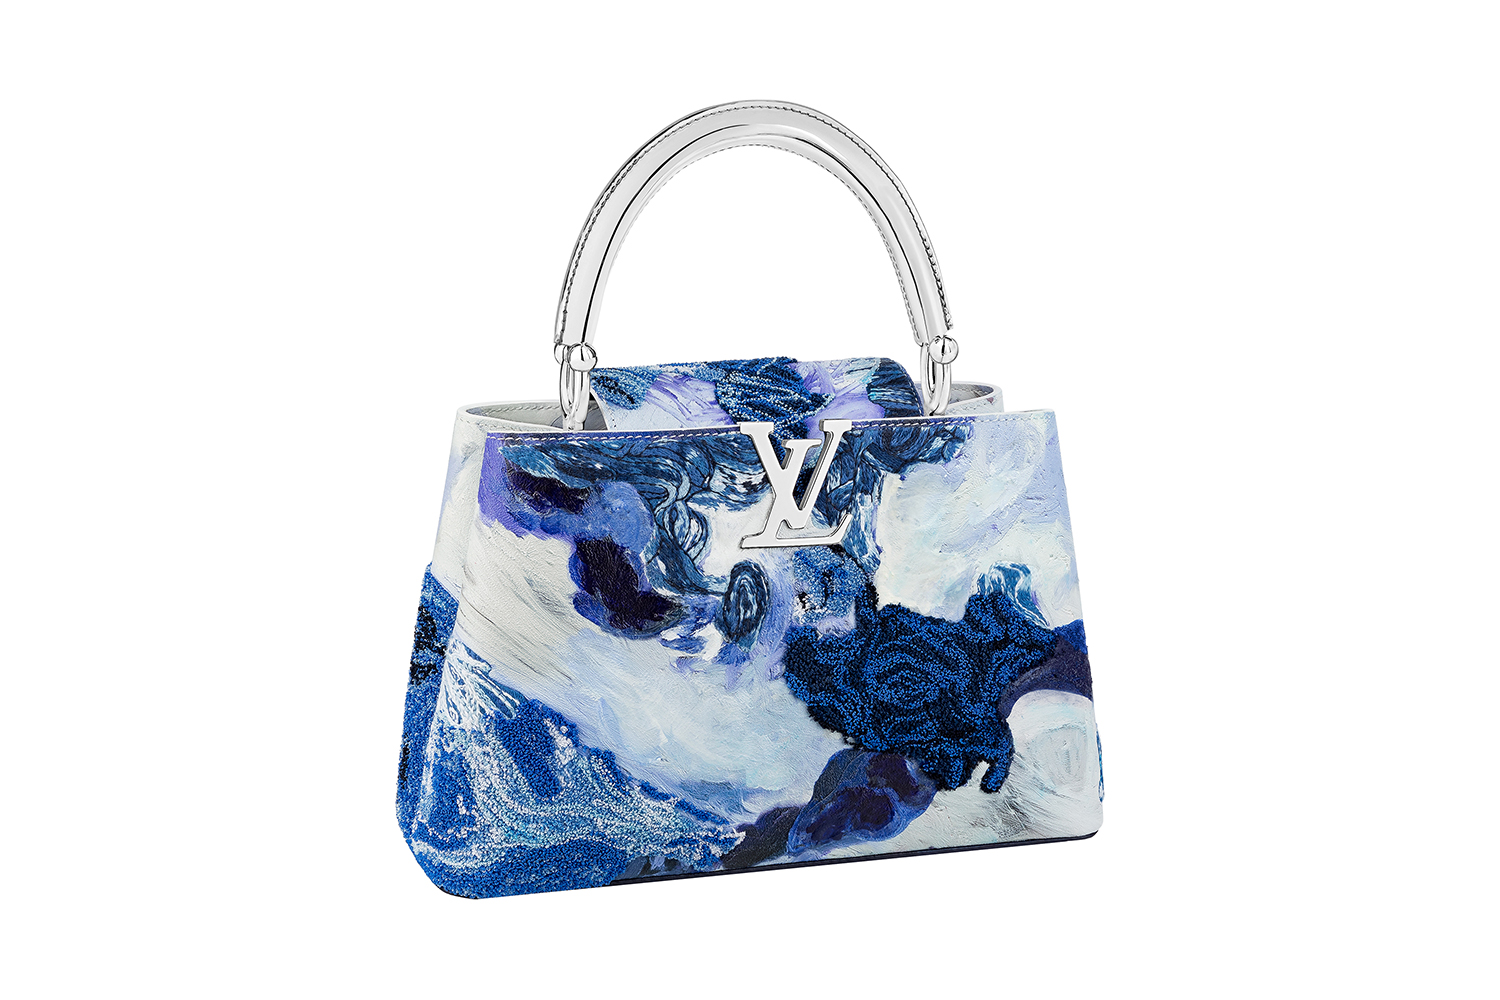 LOUIS VUITTON ARTYCAPUCINES: PRESENTED THE NEW CREATIONS OF THE